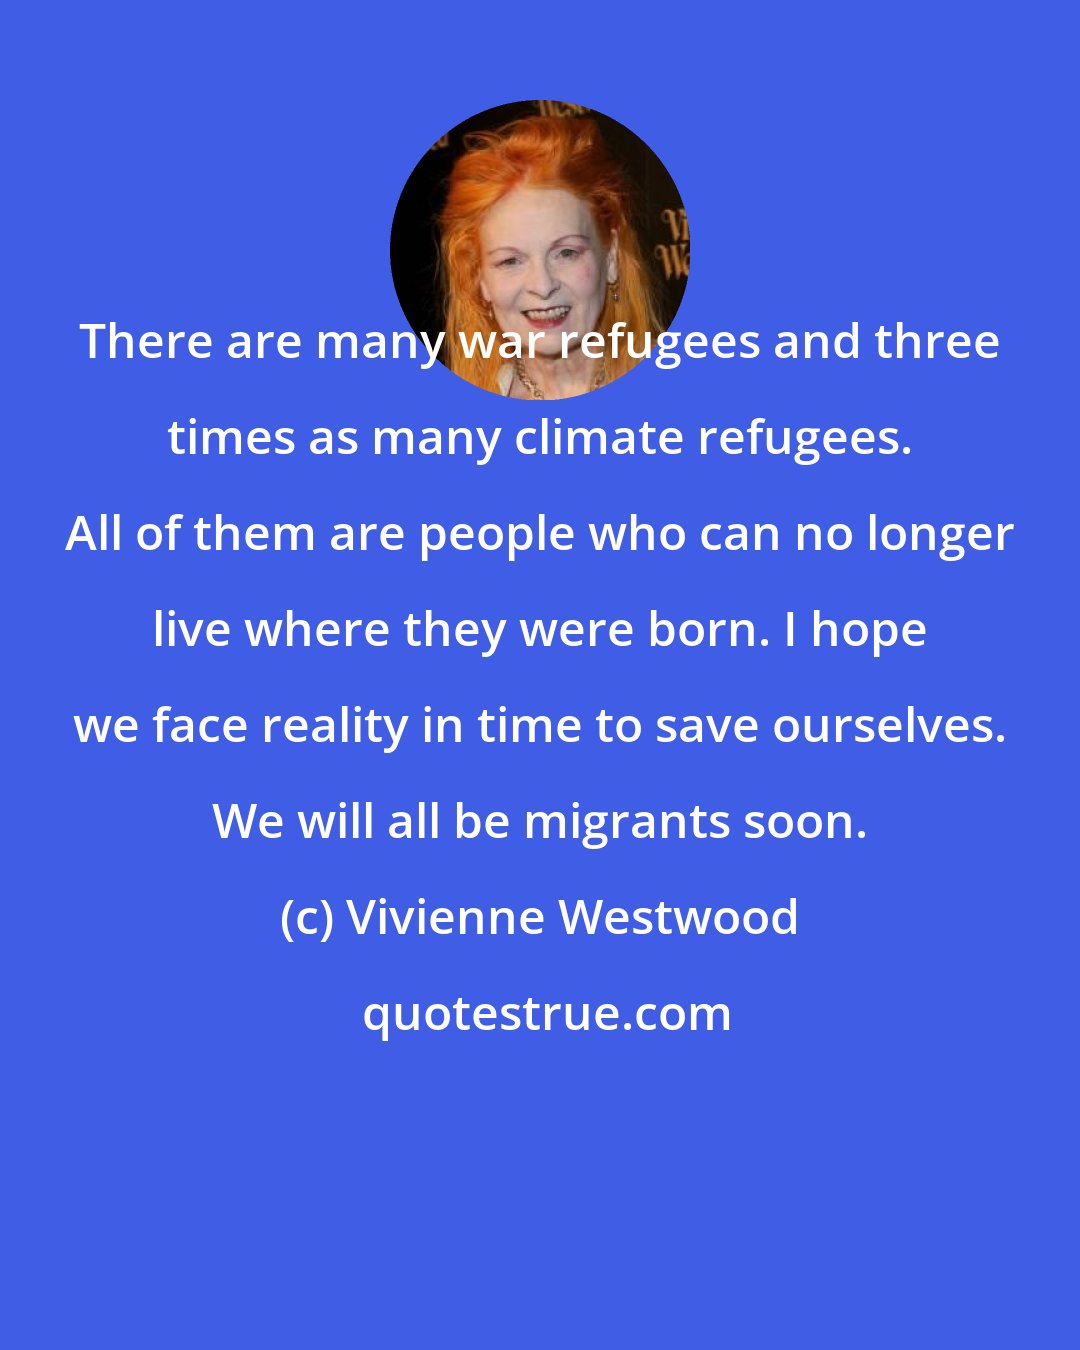 Vivienne Westwood: There are many war refugees and three times as many climate refugees. All of them are people who can no longer live where they were born. I hope we face reality in time to save ourselves. We will all be migrants soon.